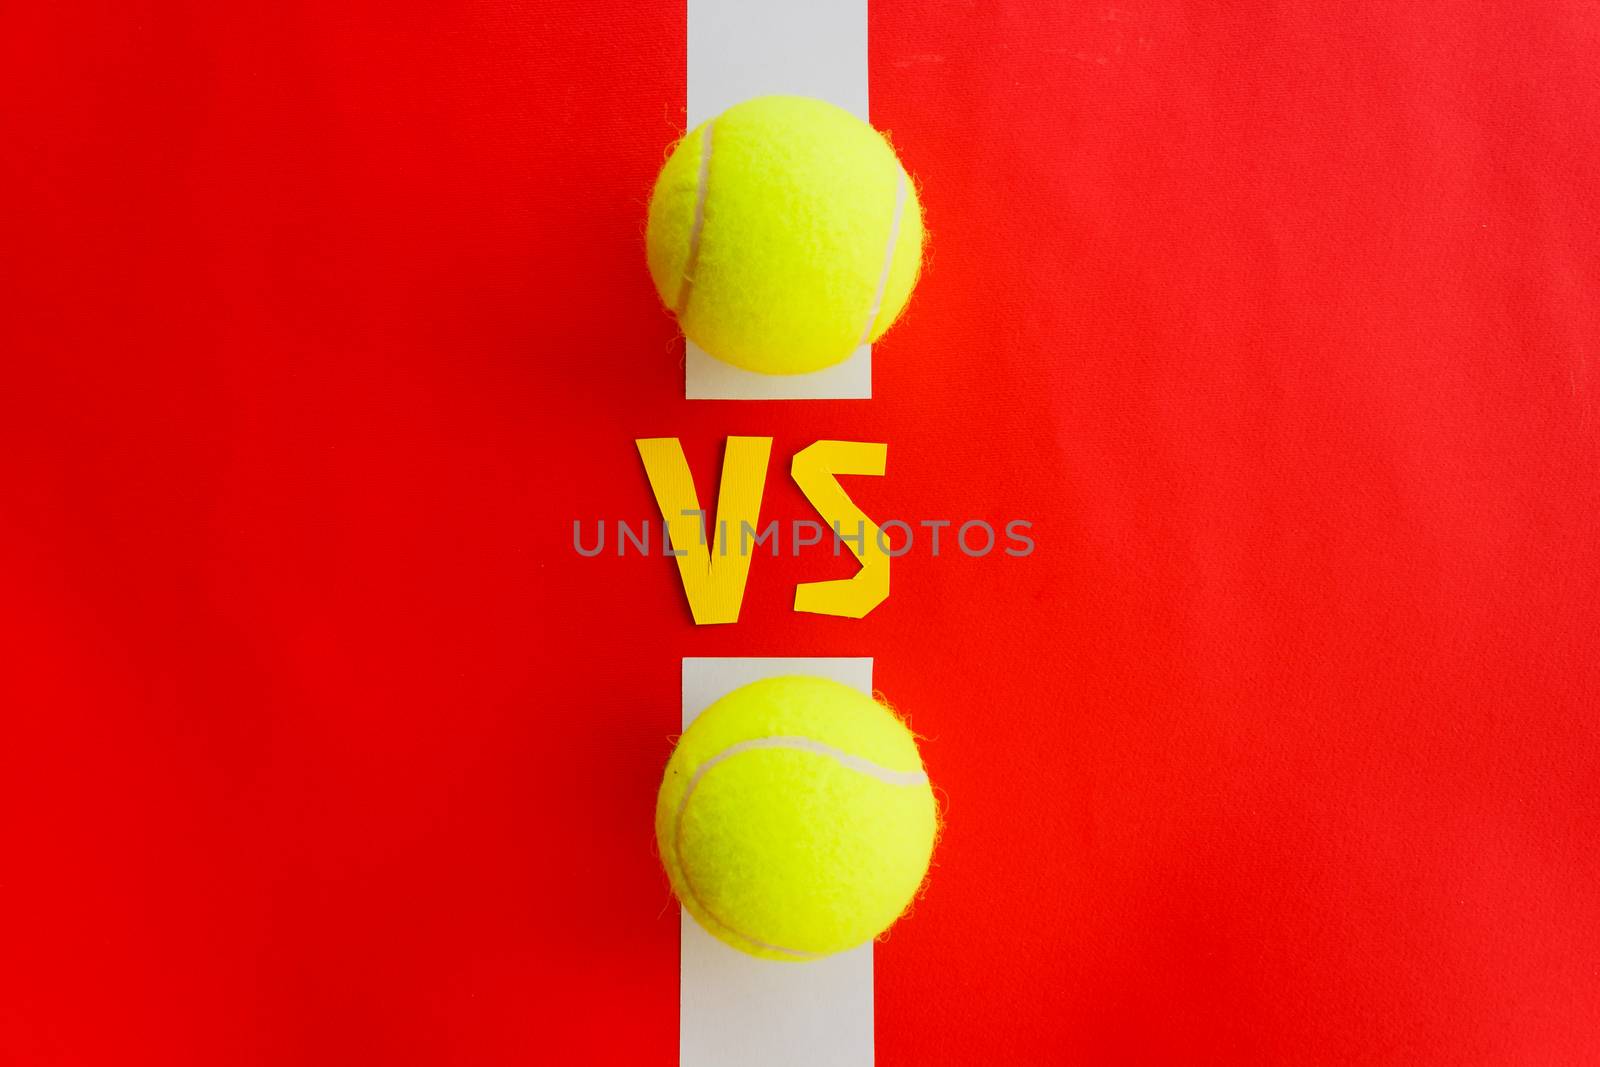 the abbreviation vs of the Latin word versus it is used in tennis  to indicate the match between two teams or players